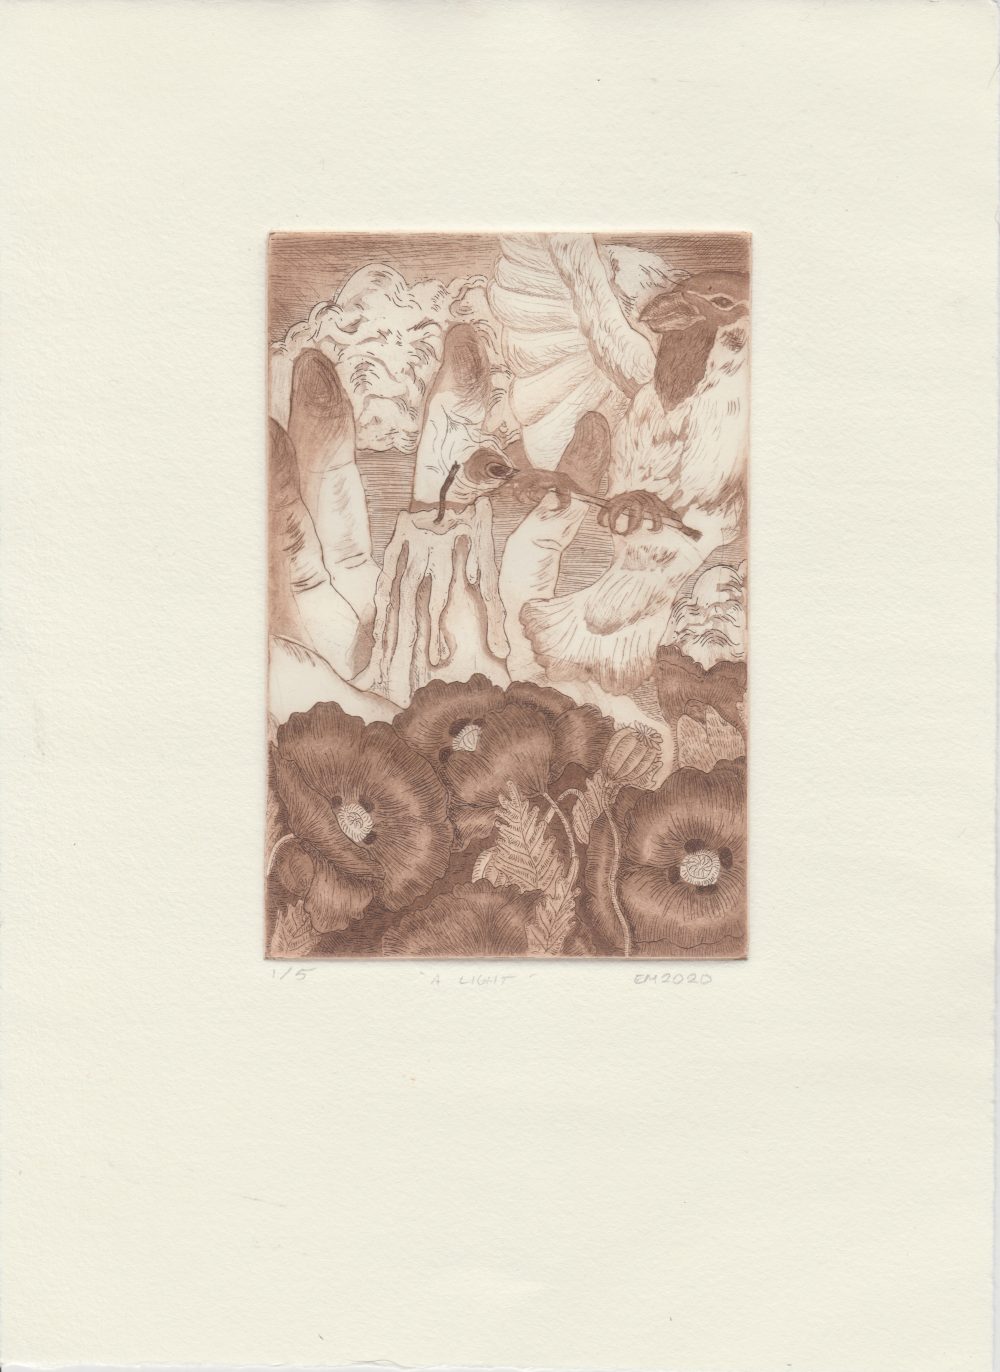 Emerson Mitchell; A Light, 2020; Etching, Aquatint, and Drypoint on Hahnemuhle Copperplate paper; 11 x 8"; Printmaking